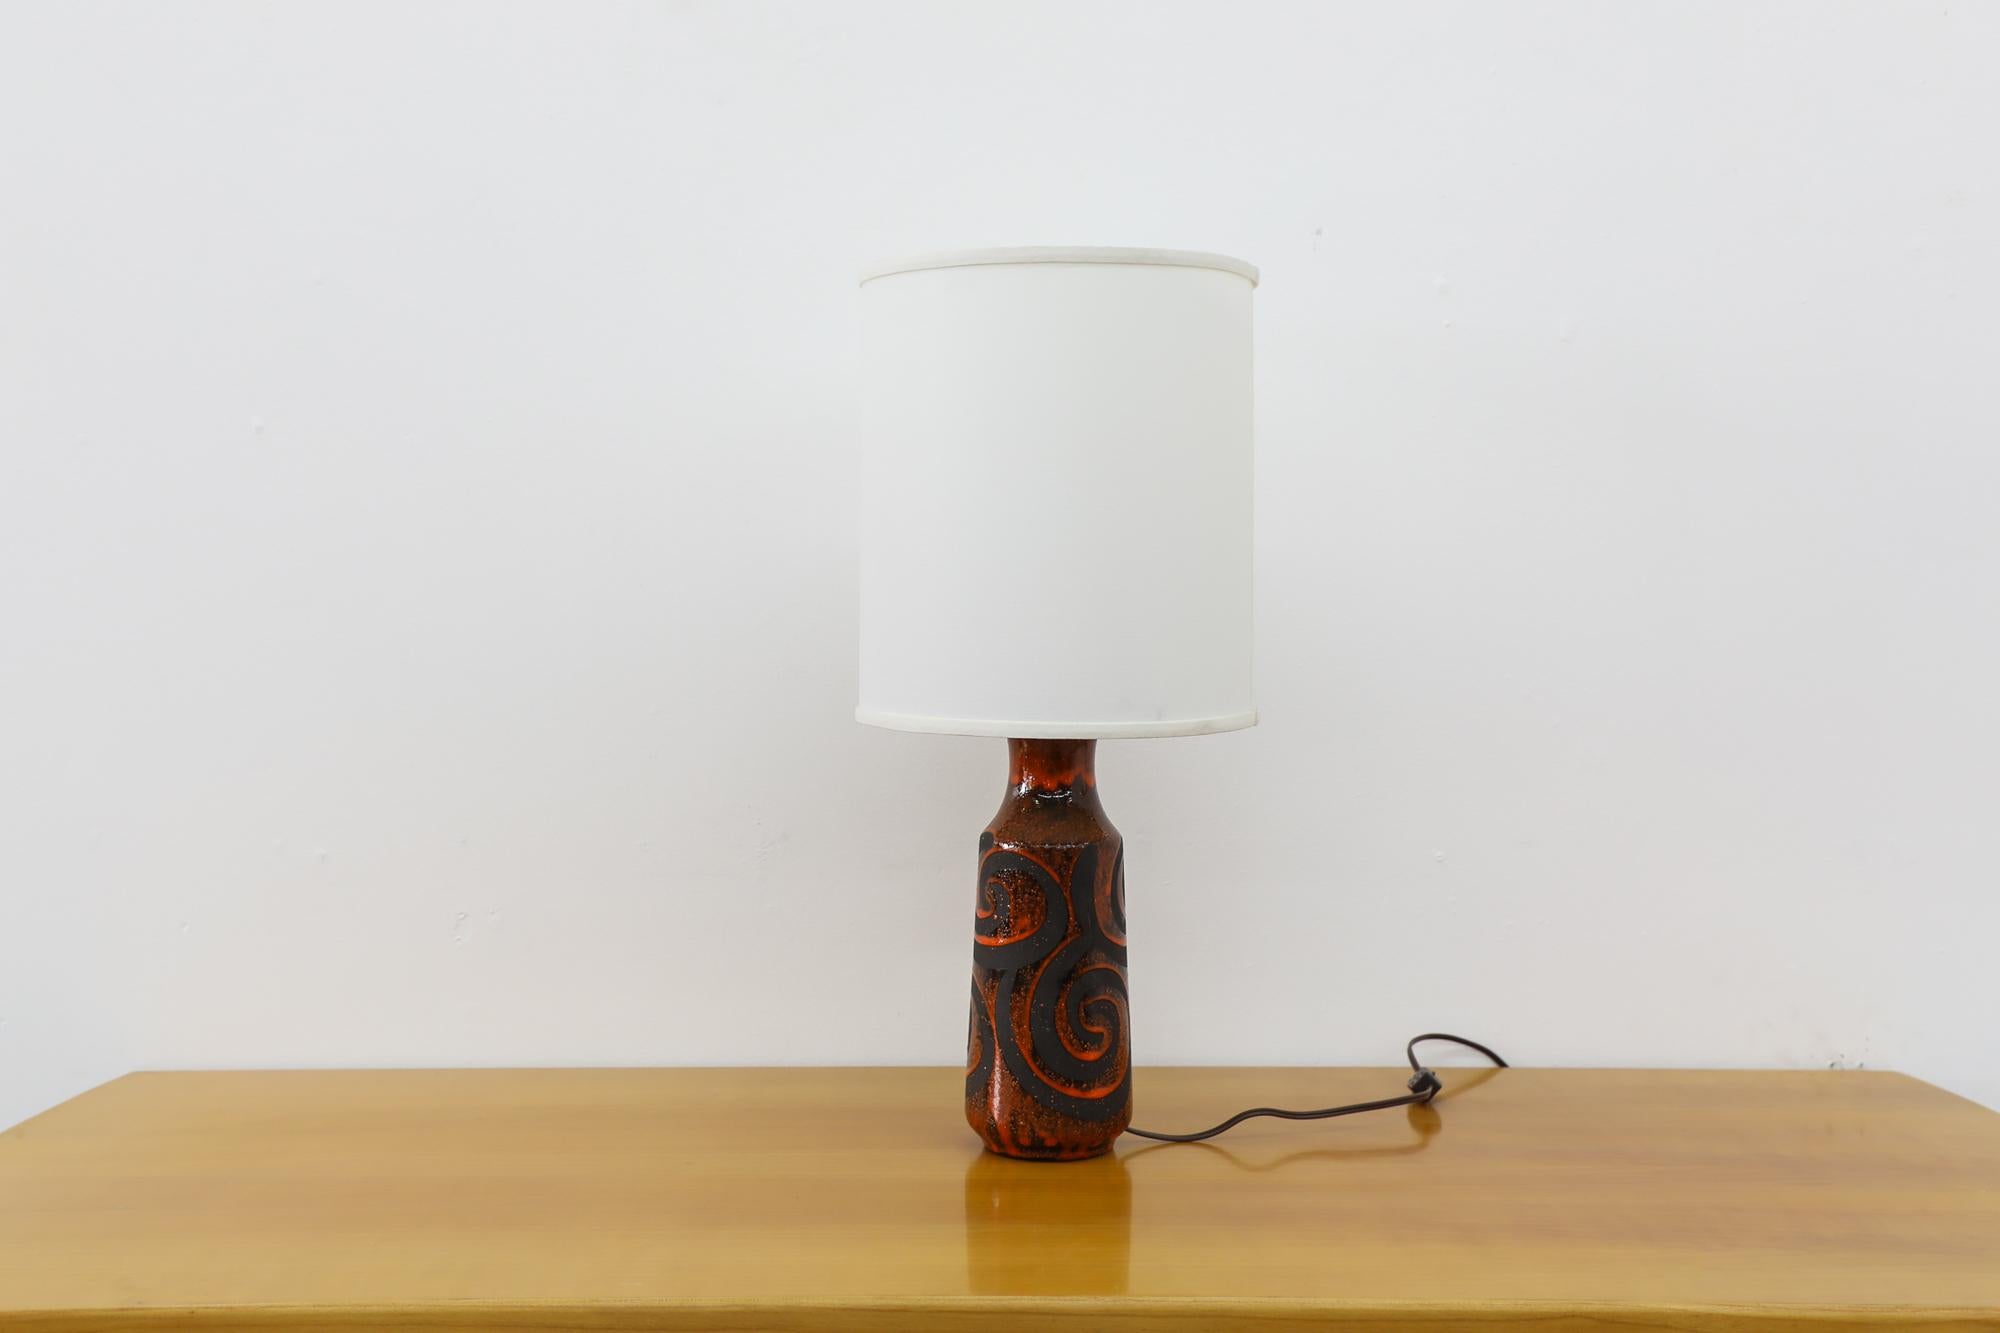 Glazed Mid-Century Red and Black Ceramic Table Lamp with Swirl Design